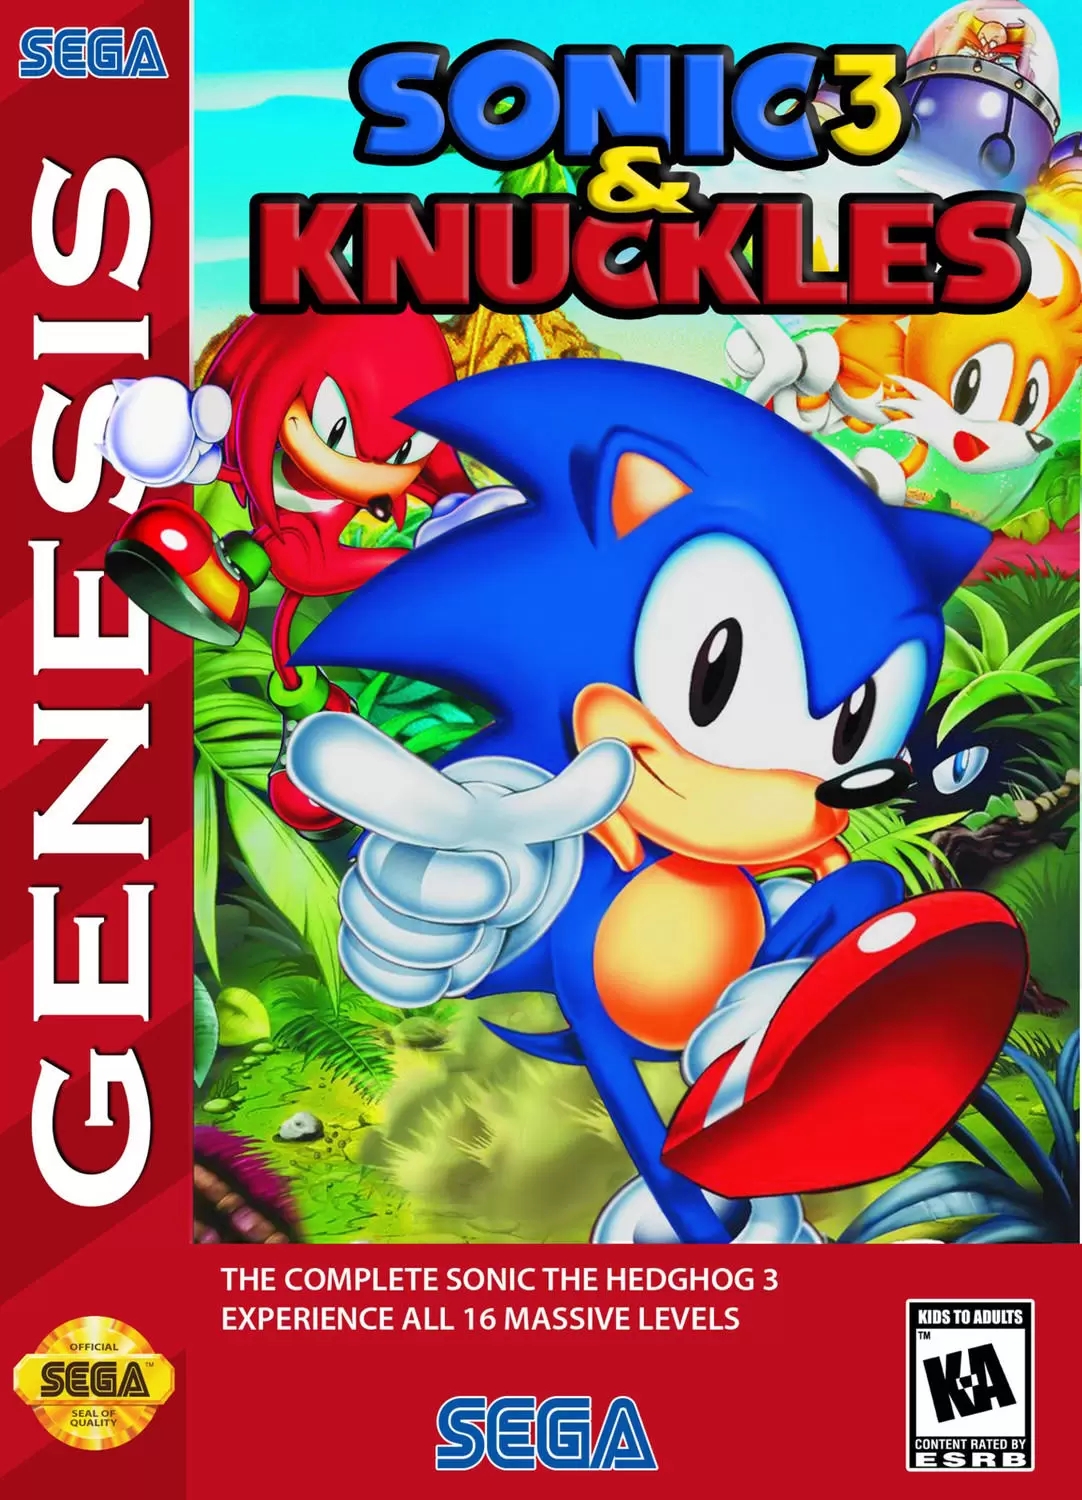 Sonic The Hedgehog 3 And Knuckles, hyper sonic the hedgehog HD